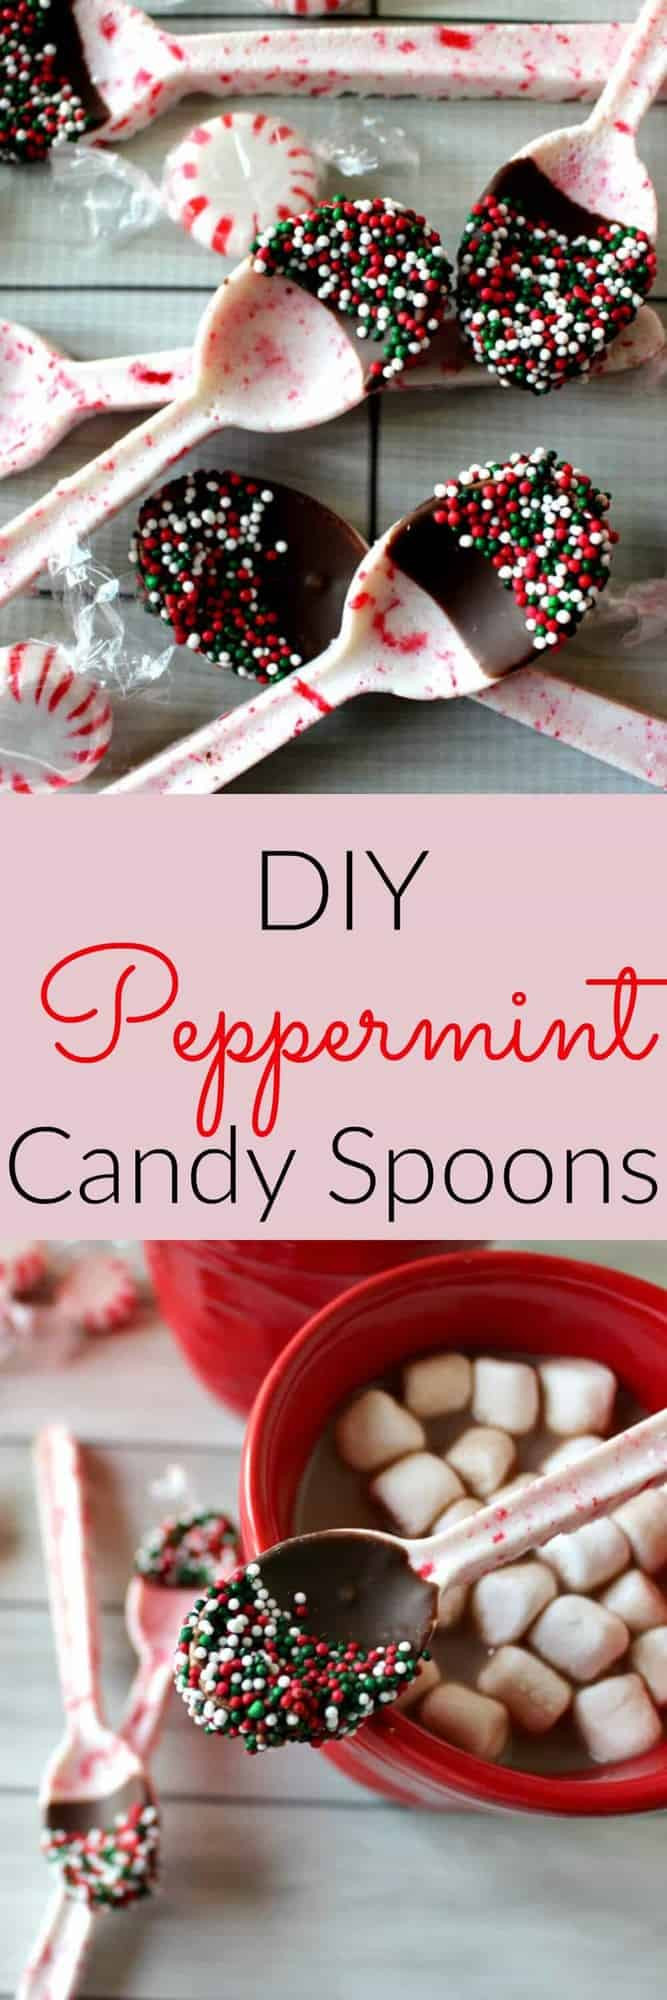 DIY Christmas Gifts Videos
 DIY Peppermint Candy Spoons Princess Pinky Girl